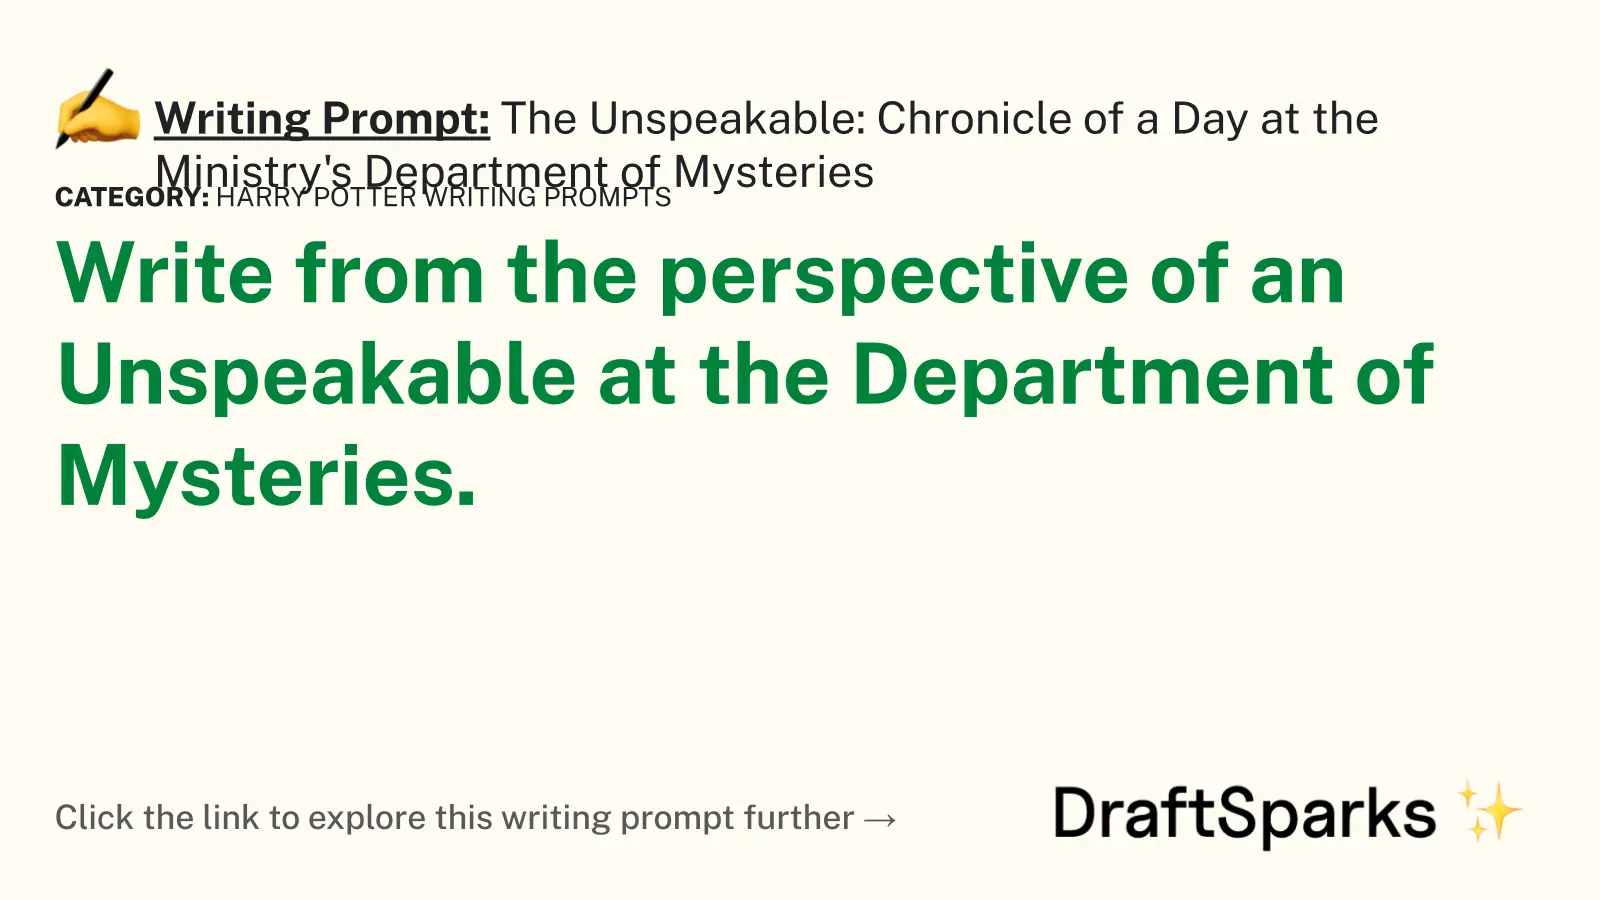 The Unspeakable: Chronicle of a Day at the Ministry’s Department of Mysteries